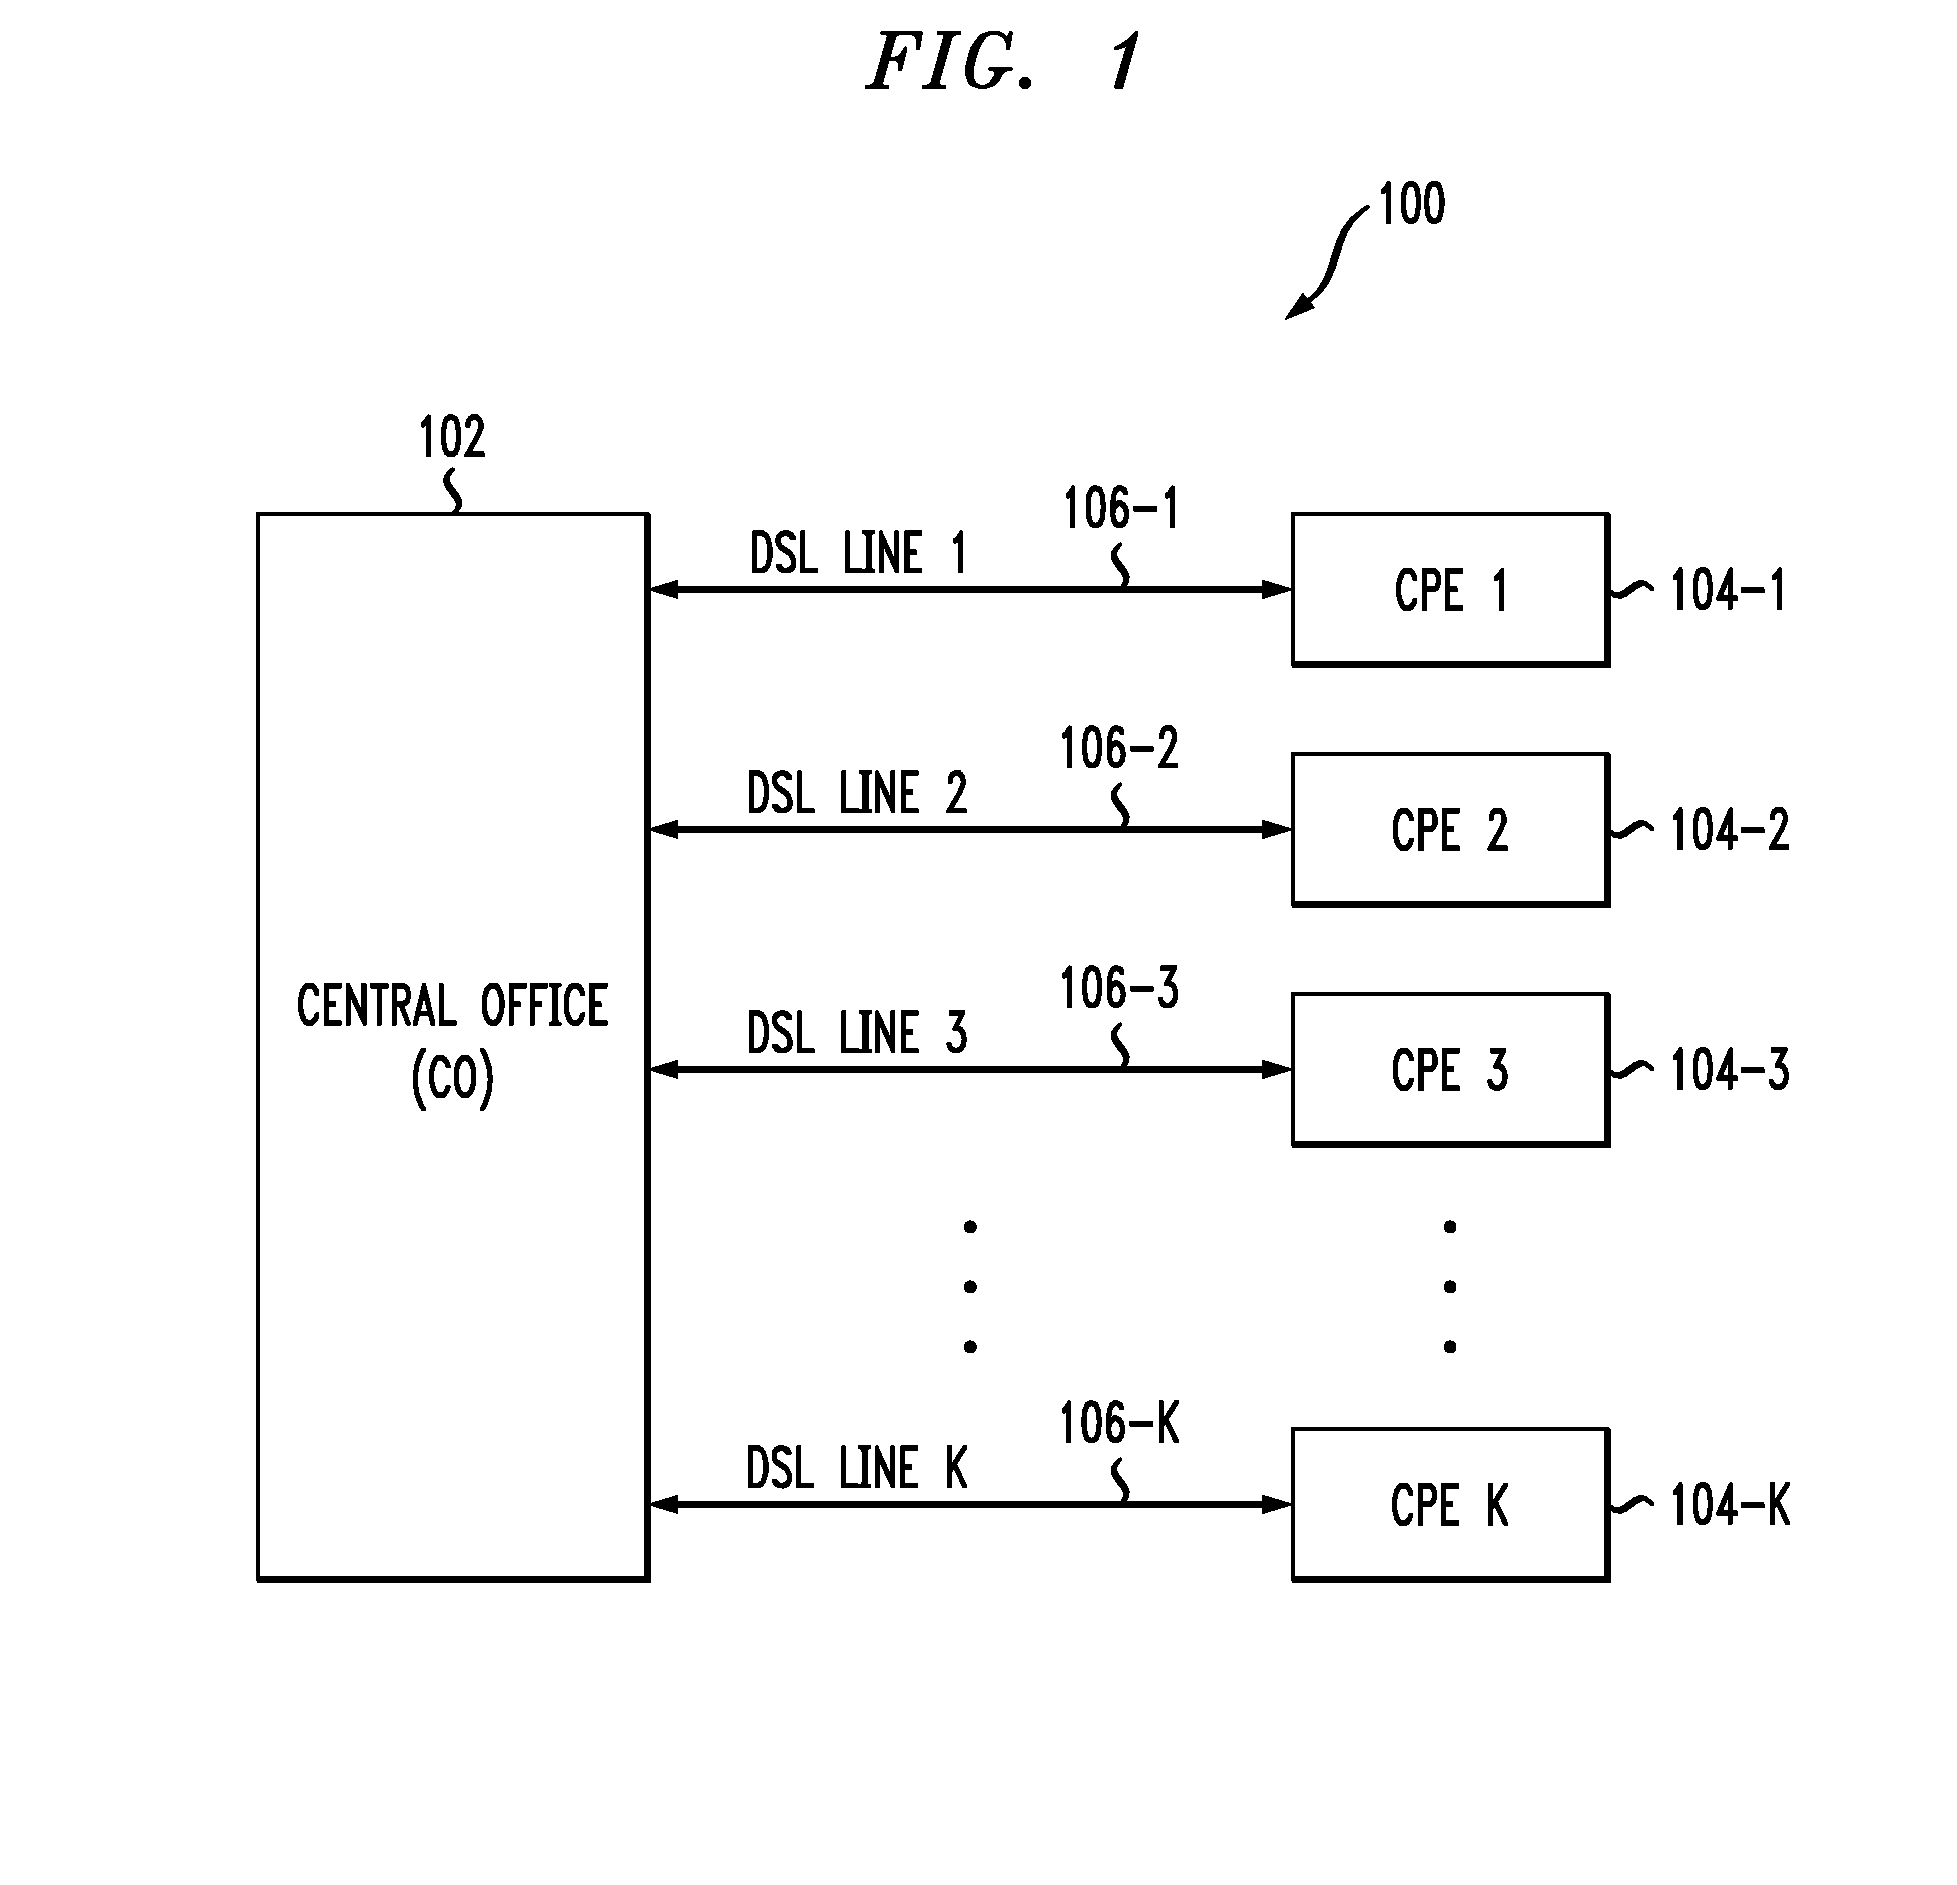 Fast Seamless Joining of Channels in a Multi-Channel Communication System